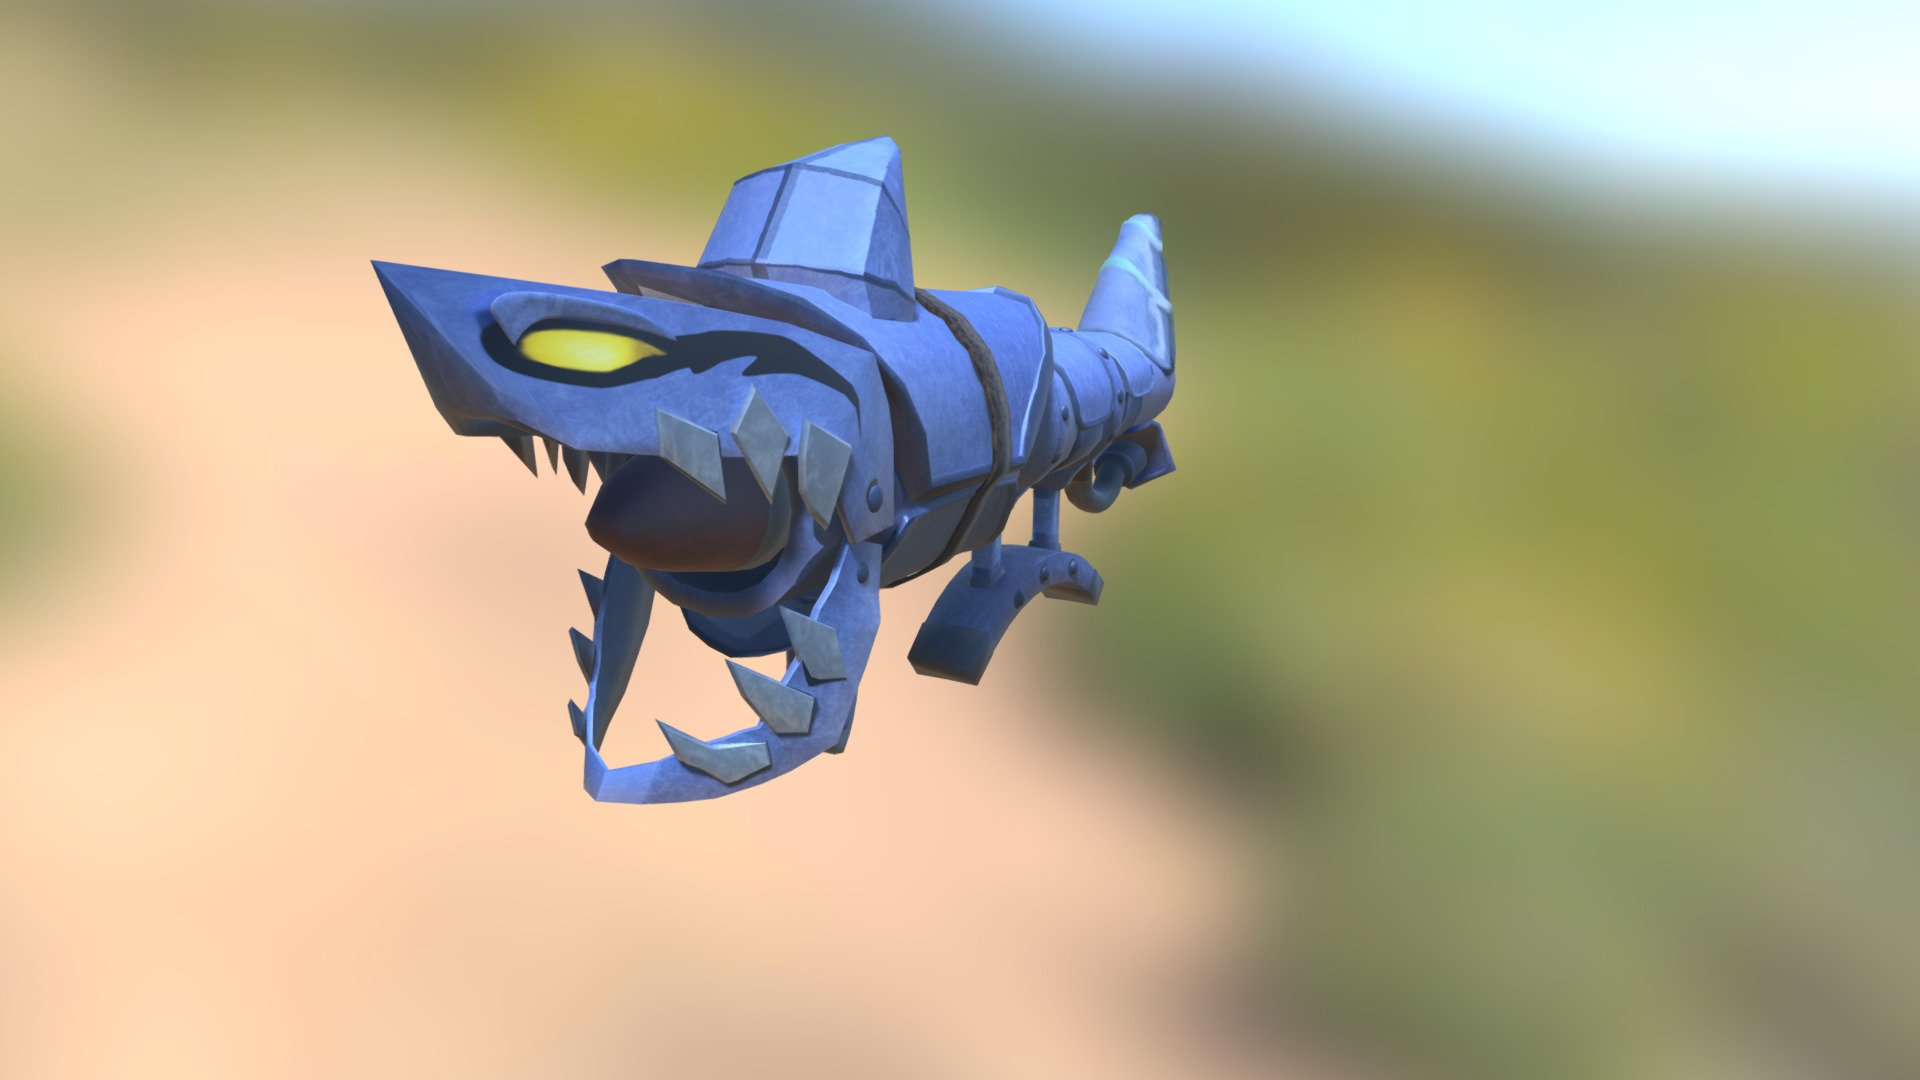 This is one of my more serious work. Hope you like it ! - Shark Gun - 3D model by damqq 3d model